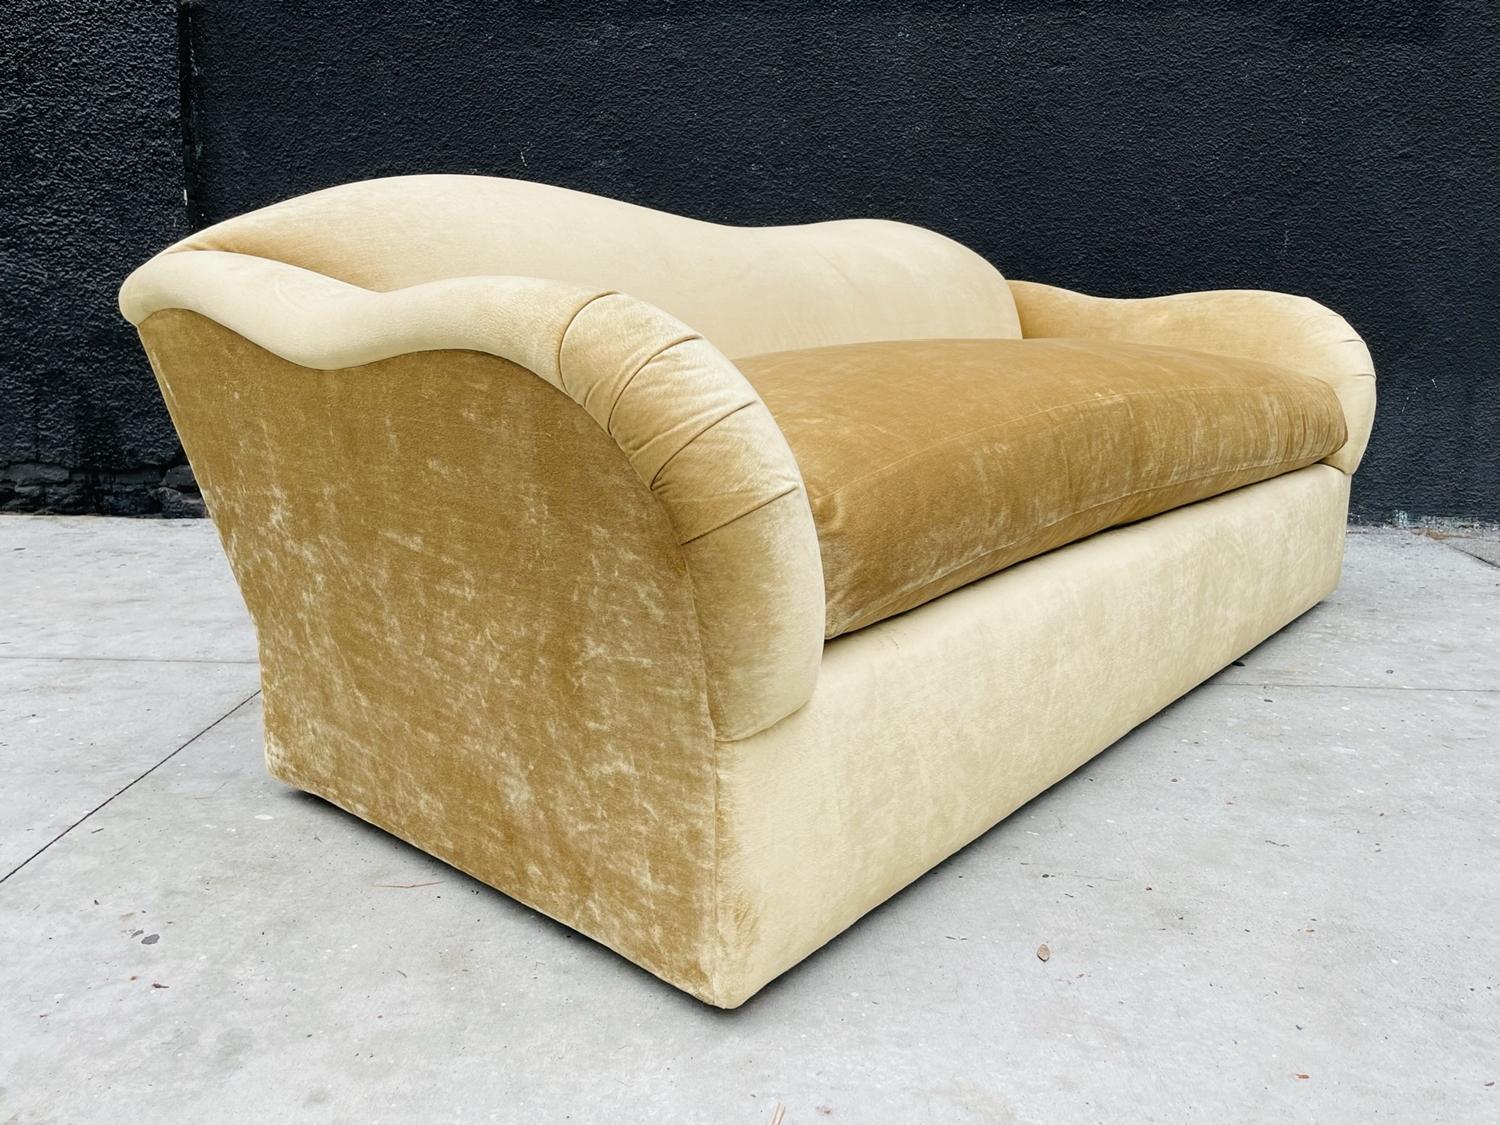 J. Robert Scott three seater Sofa, designed by Sally Sirkin Lewis. Features rolled arms and a plump single-seat cushion filled with afoam core, and down/feathers.

The sofa has beautiful sof lines, the upholstery is original and can be used in as